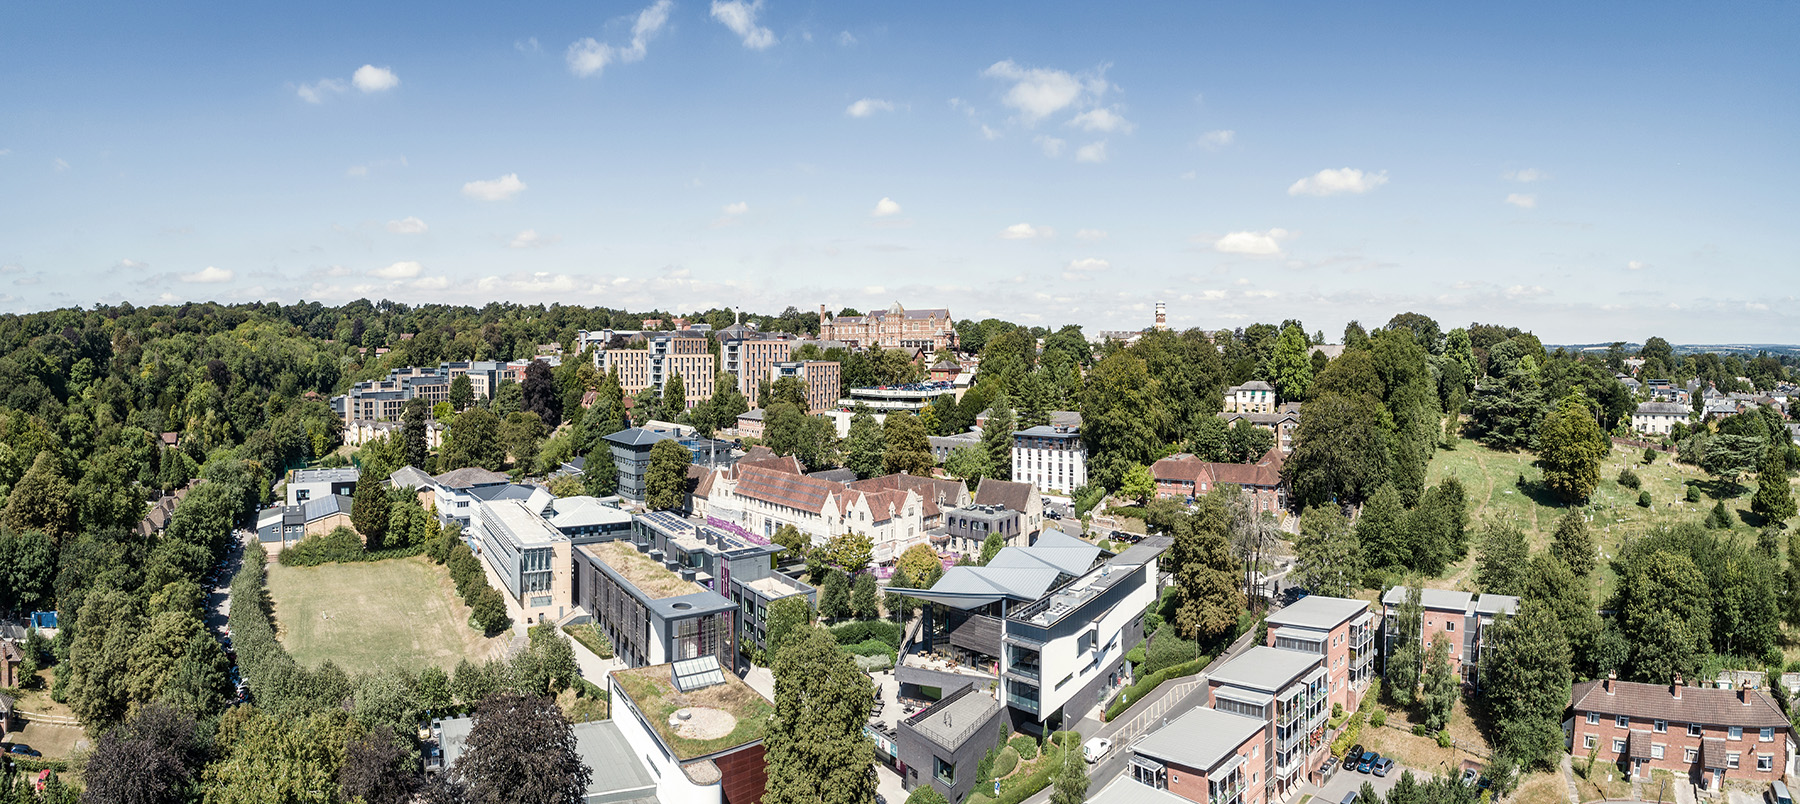 Aerial view of the University of Winchester campus